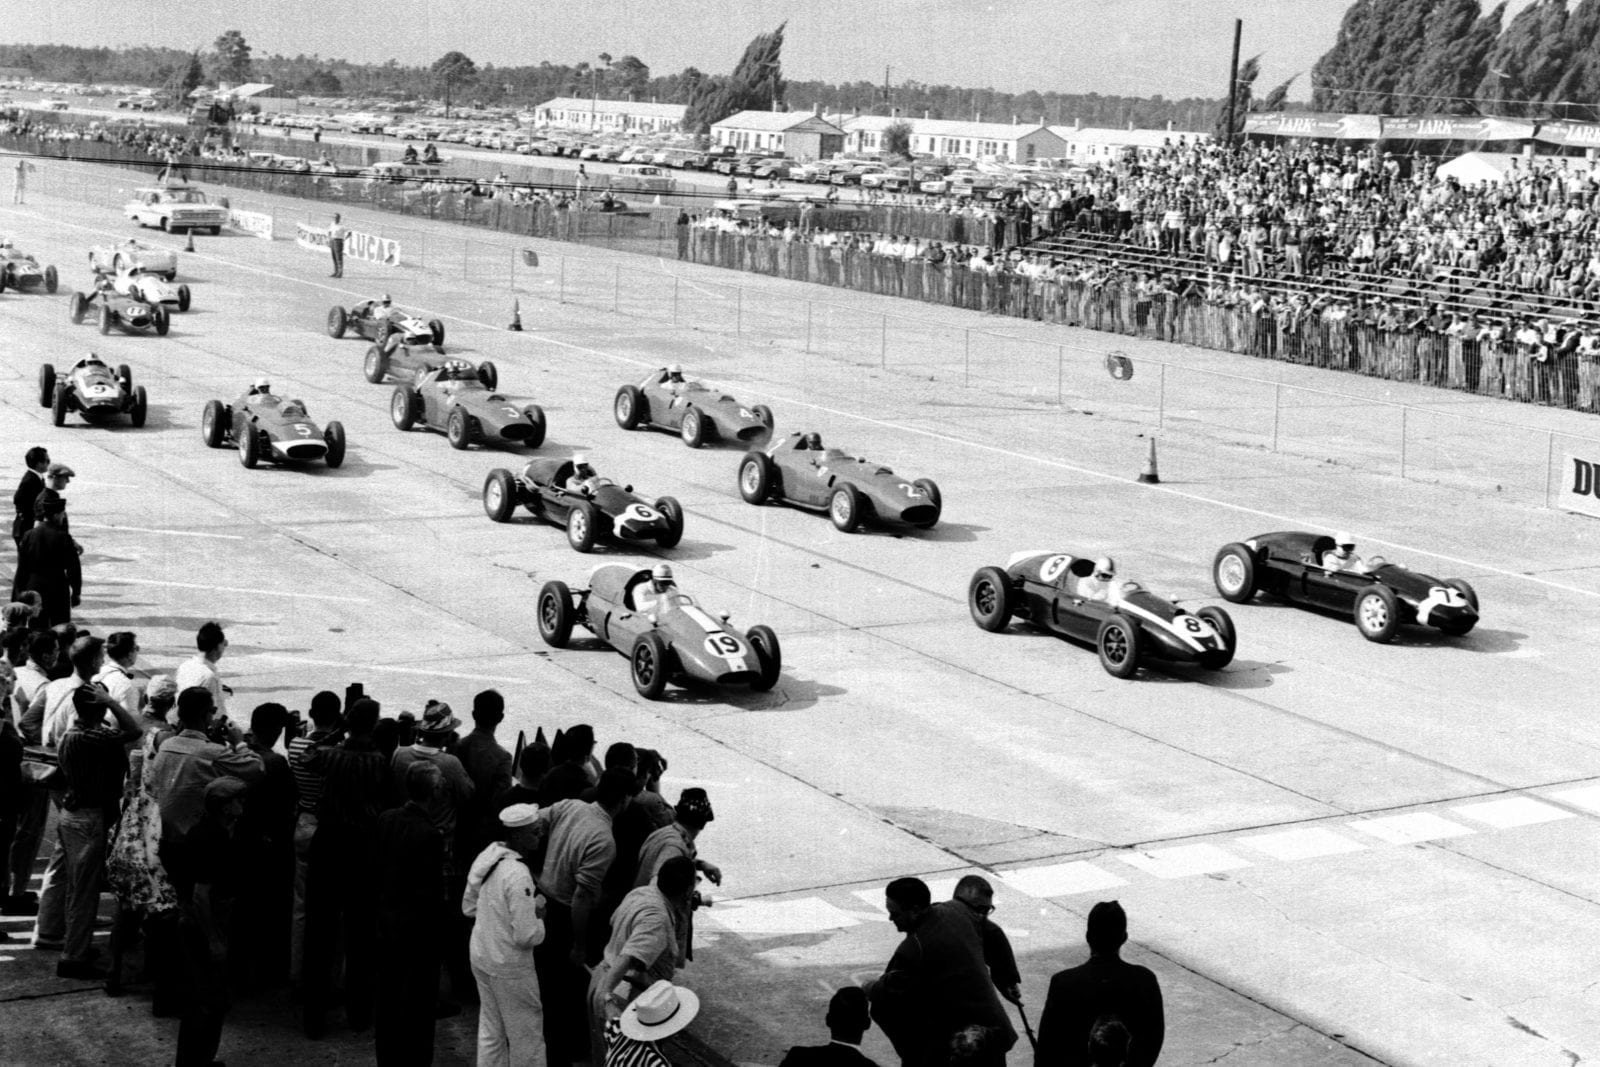 Stirling Moss, Jack Brabham and Harry Schell lead at the start of the race.